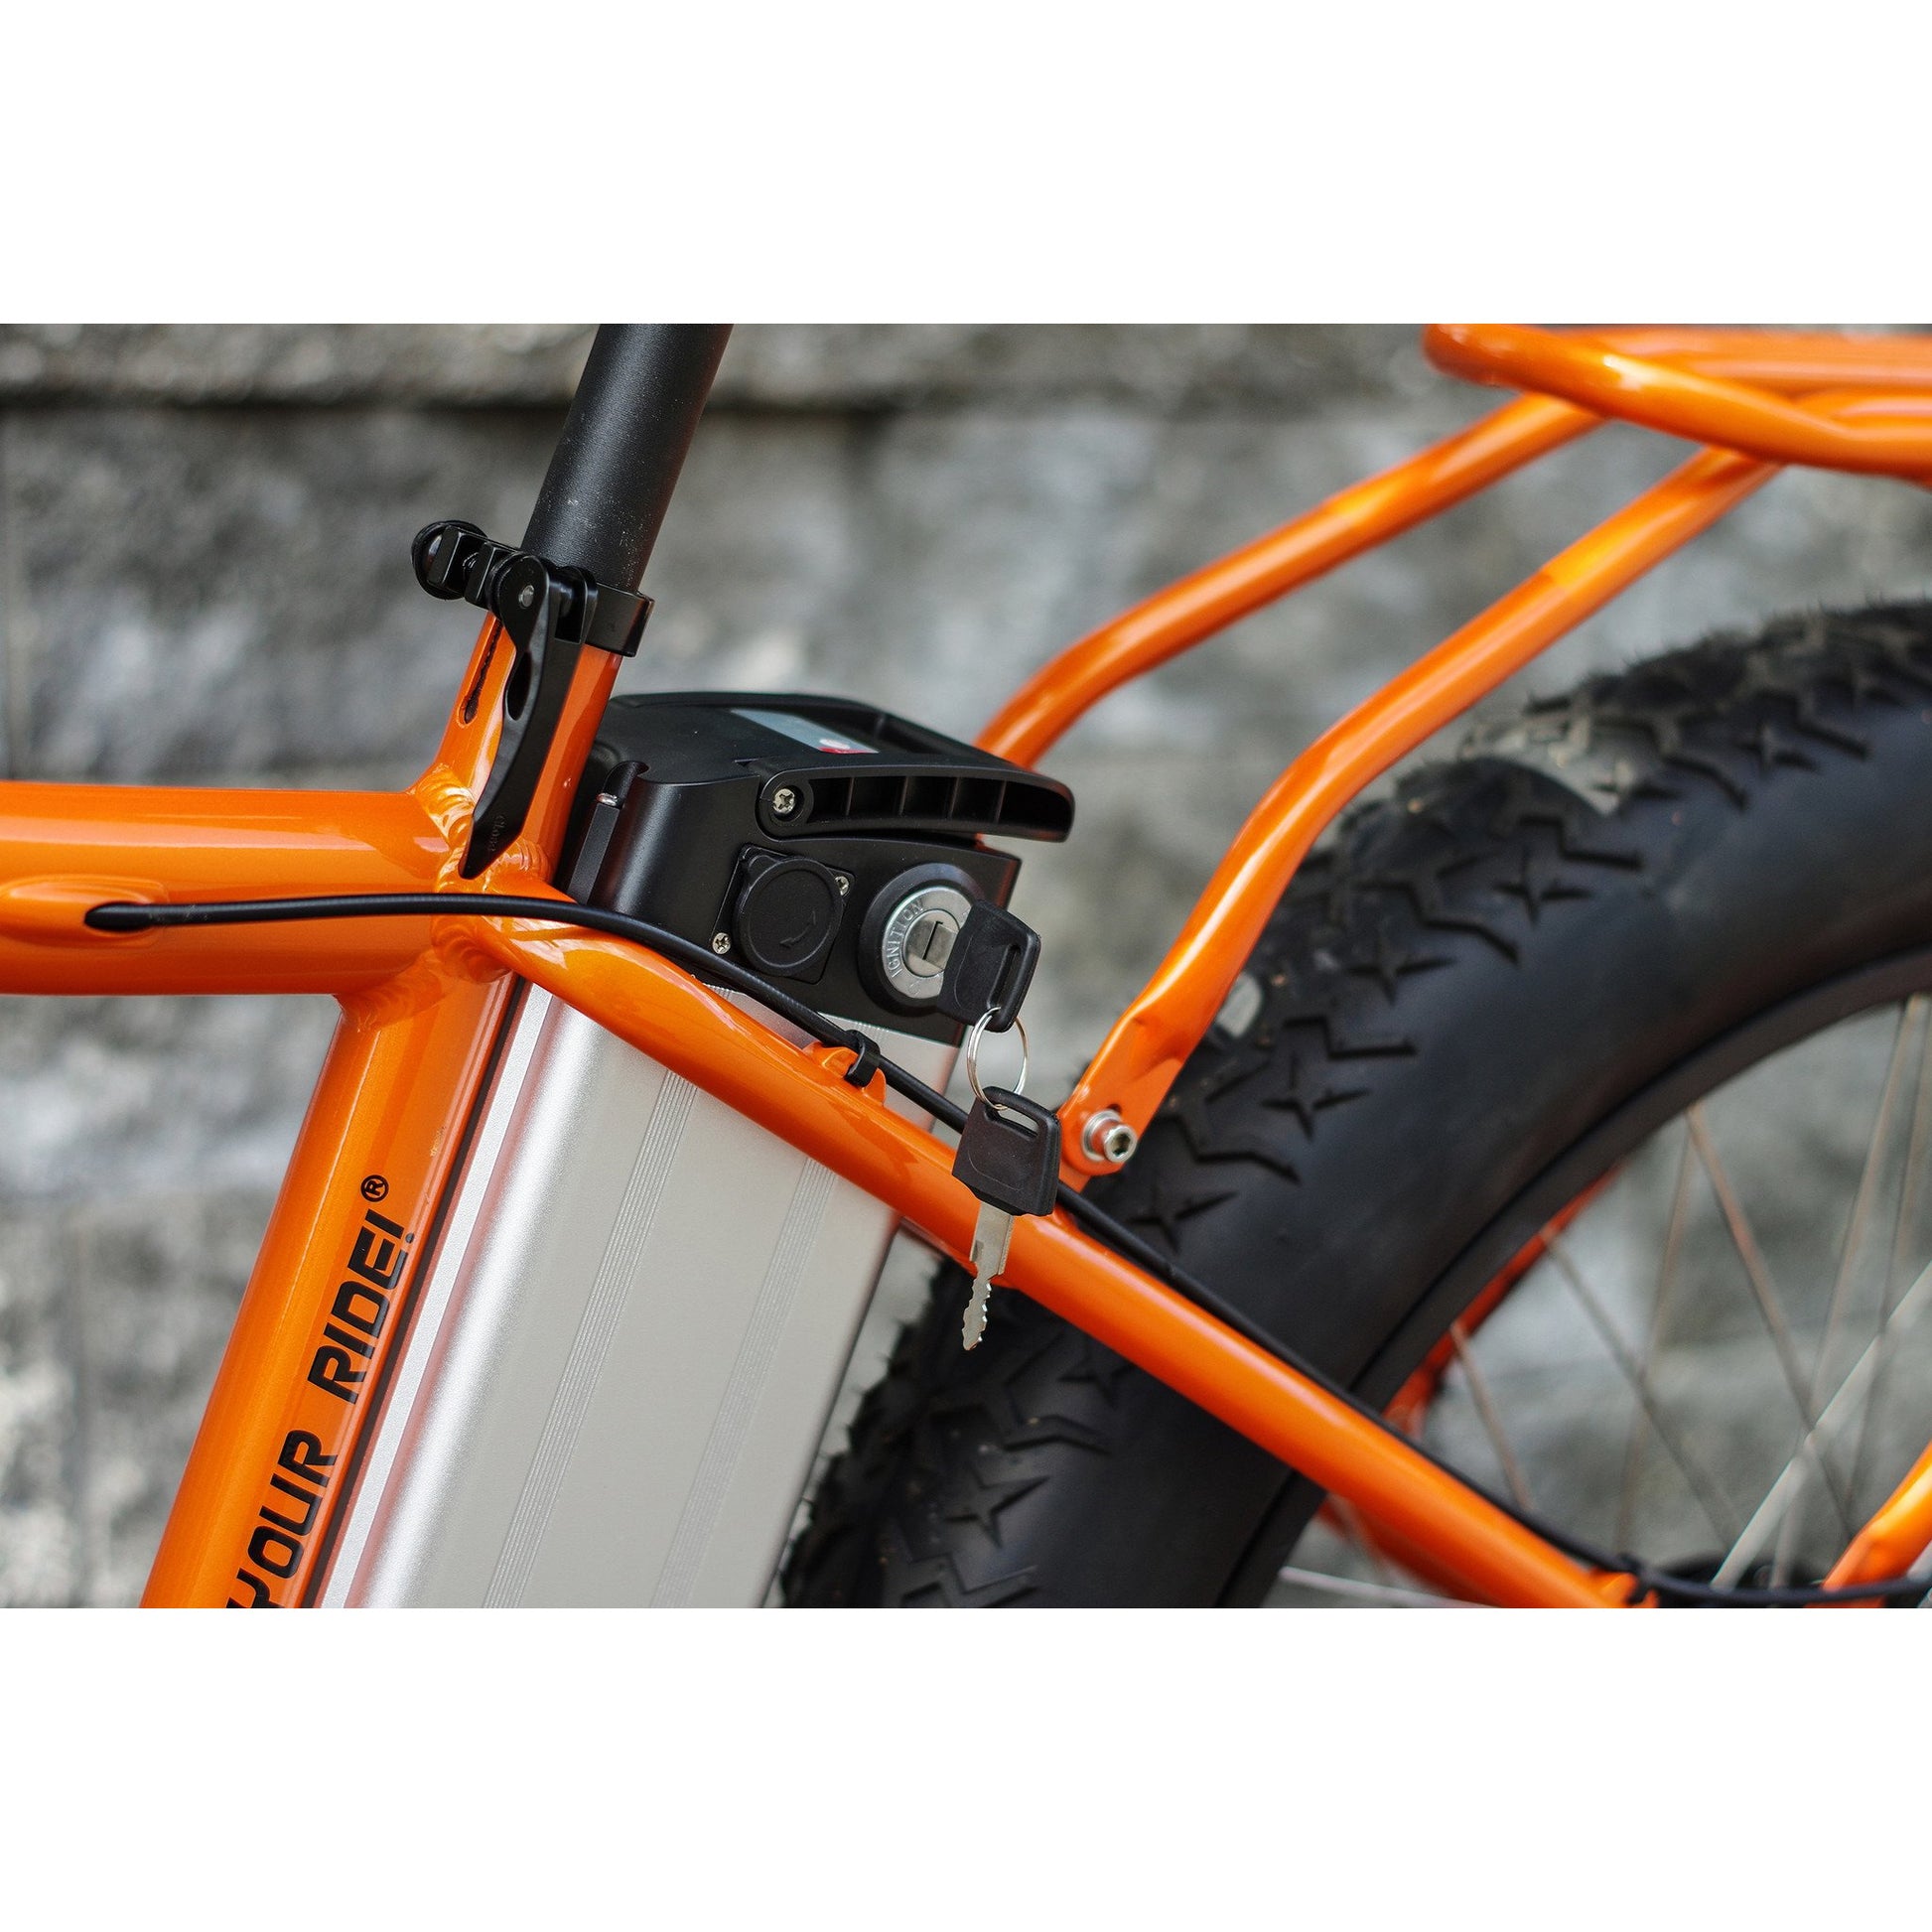 Lithium-ion battery pack in orange electric bike. 